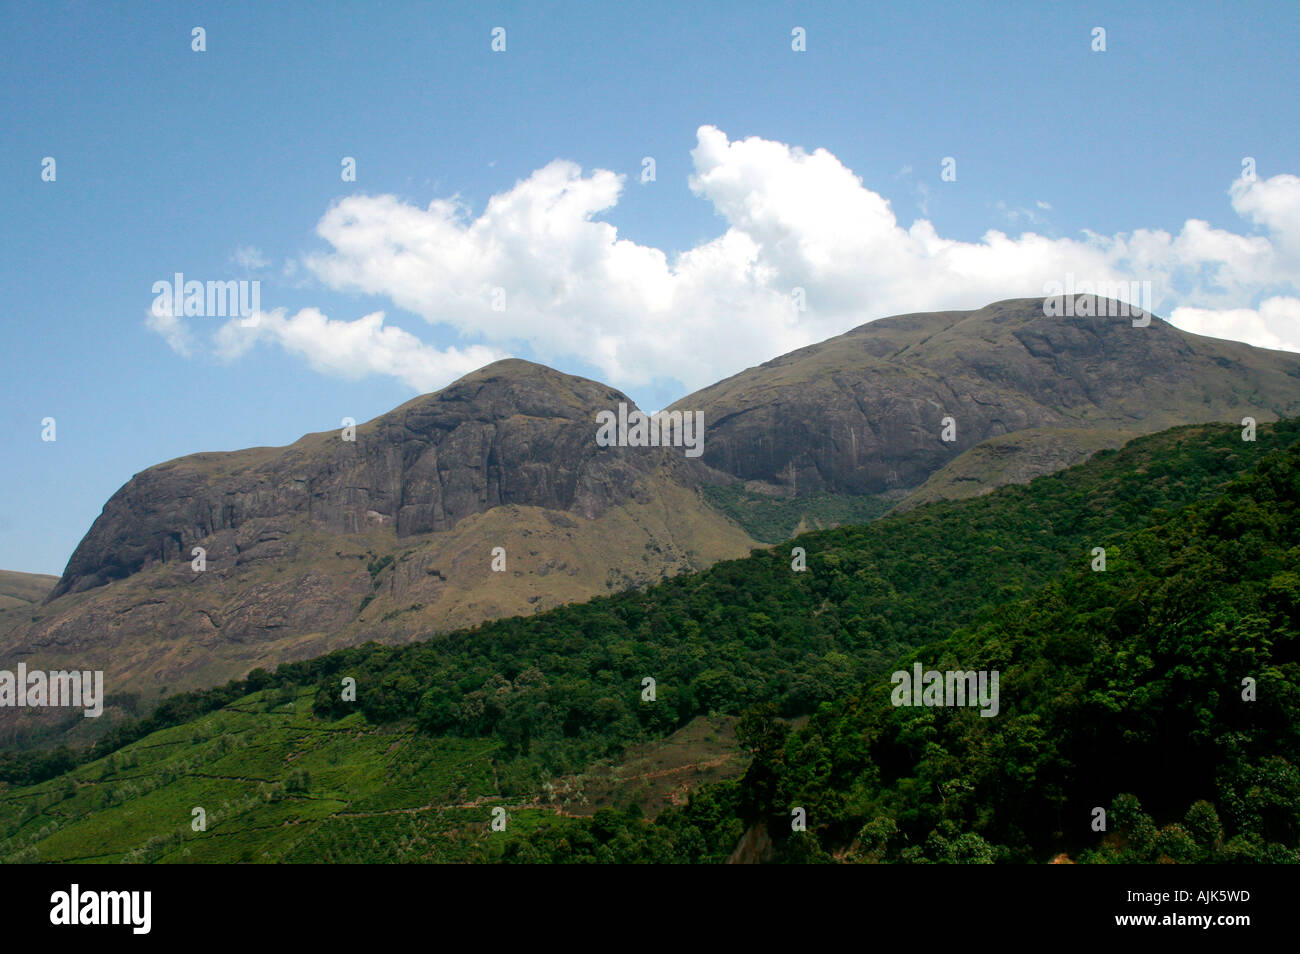 The grand mountains protecting the green valleys in Munnar, Kerala Stock Photo